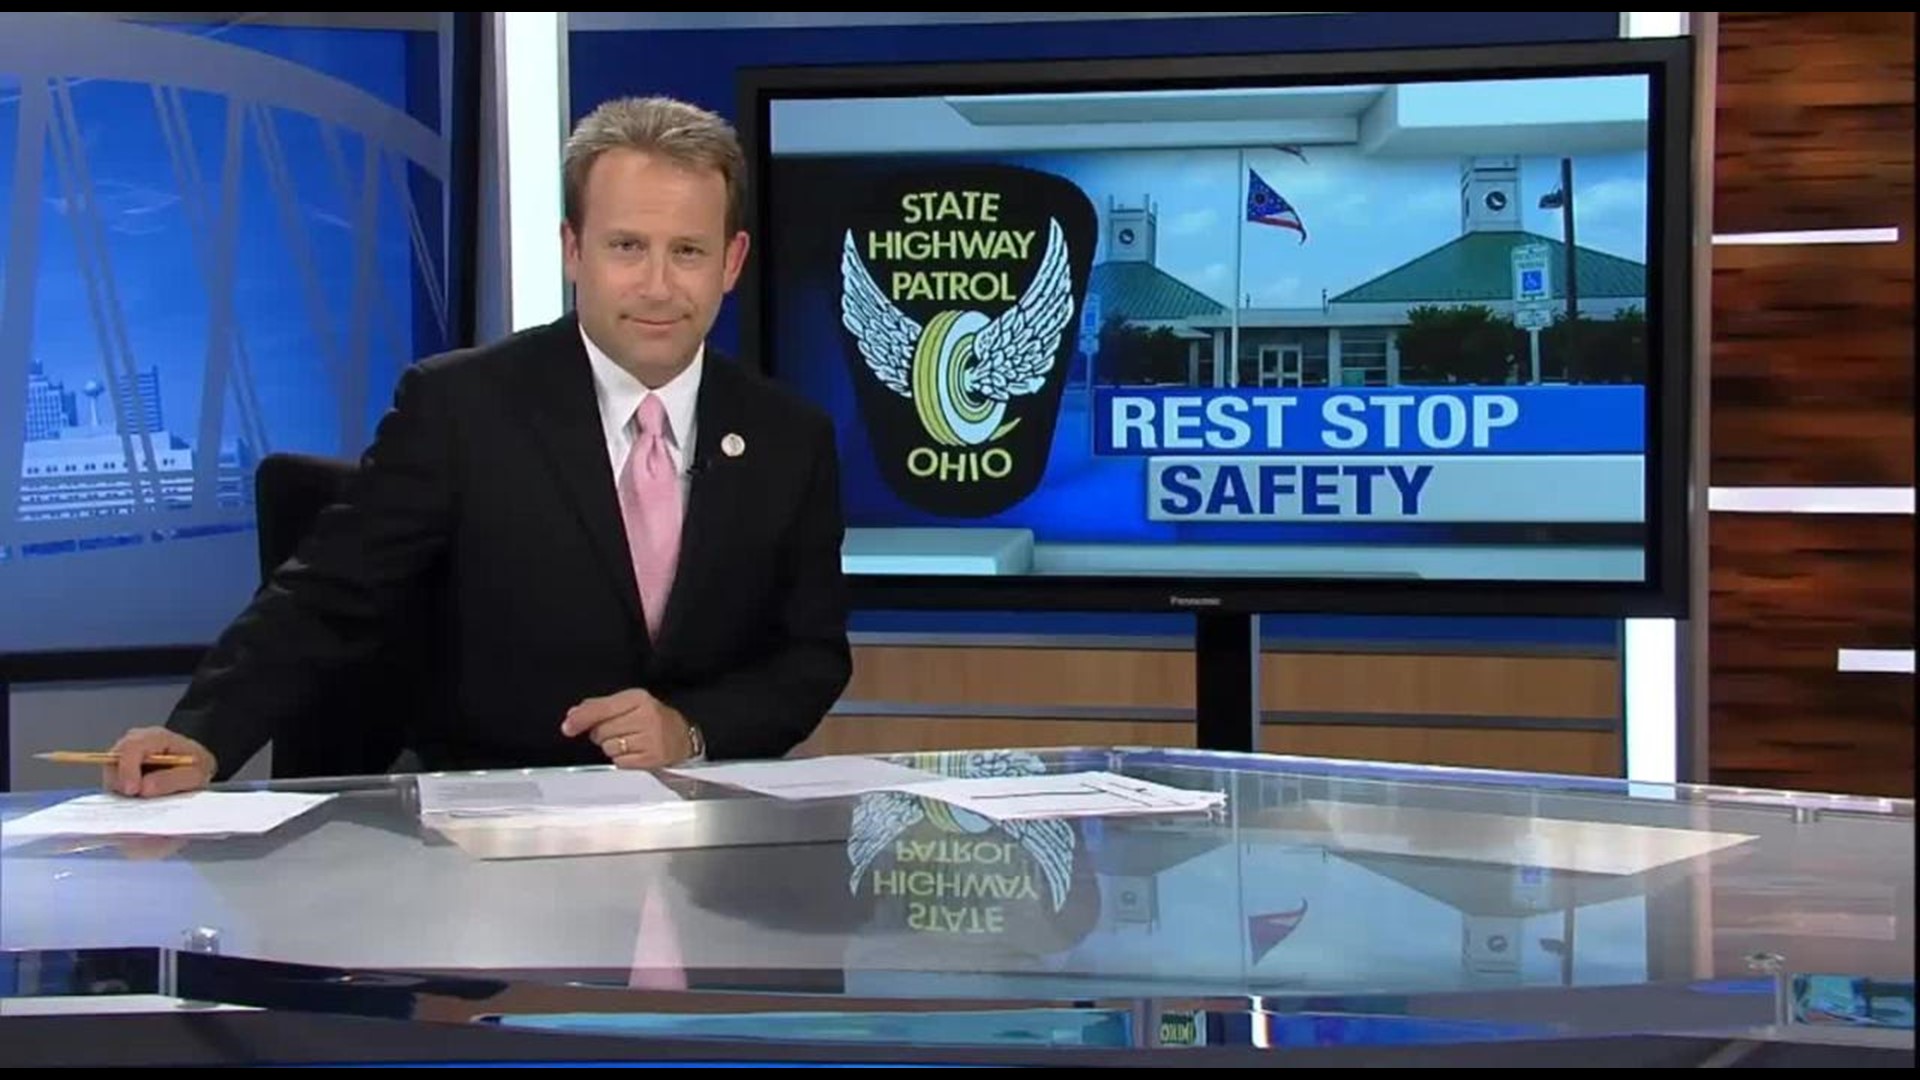 Ohio Rest Stops Get Attention From State Highway Patrol